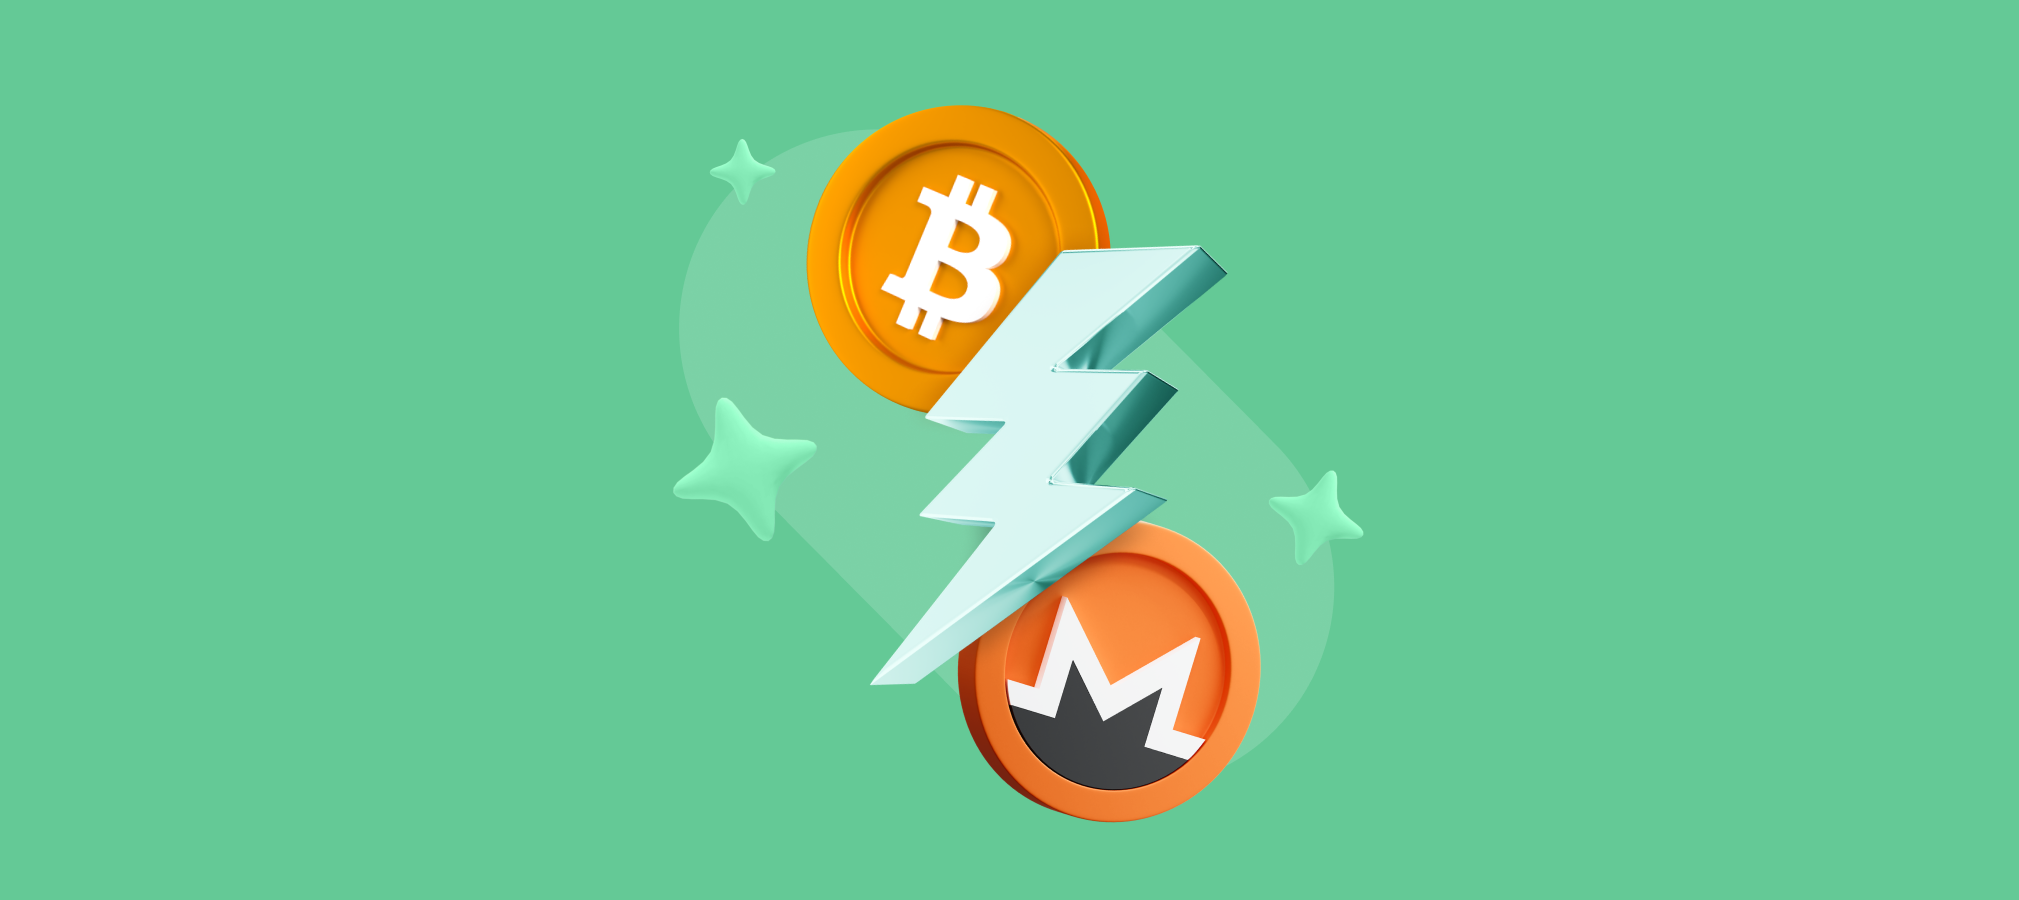 Monero XMR vs Bitcoin BTC: Which Cryptocurrency Offers the Best Privacy and Value?